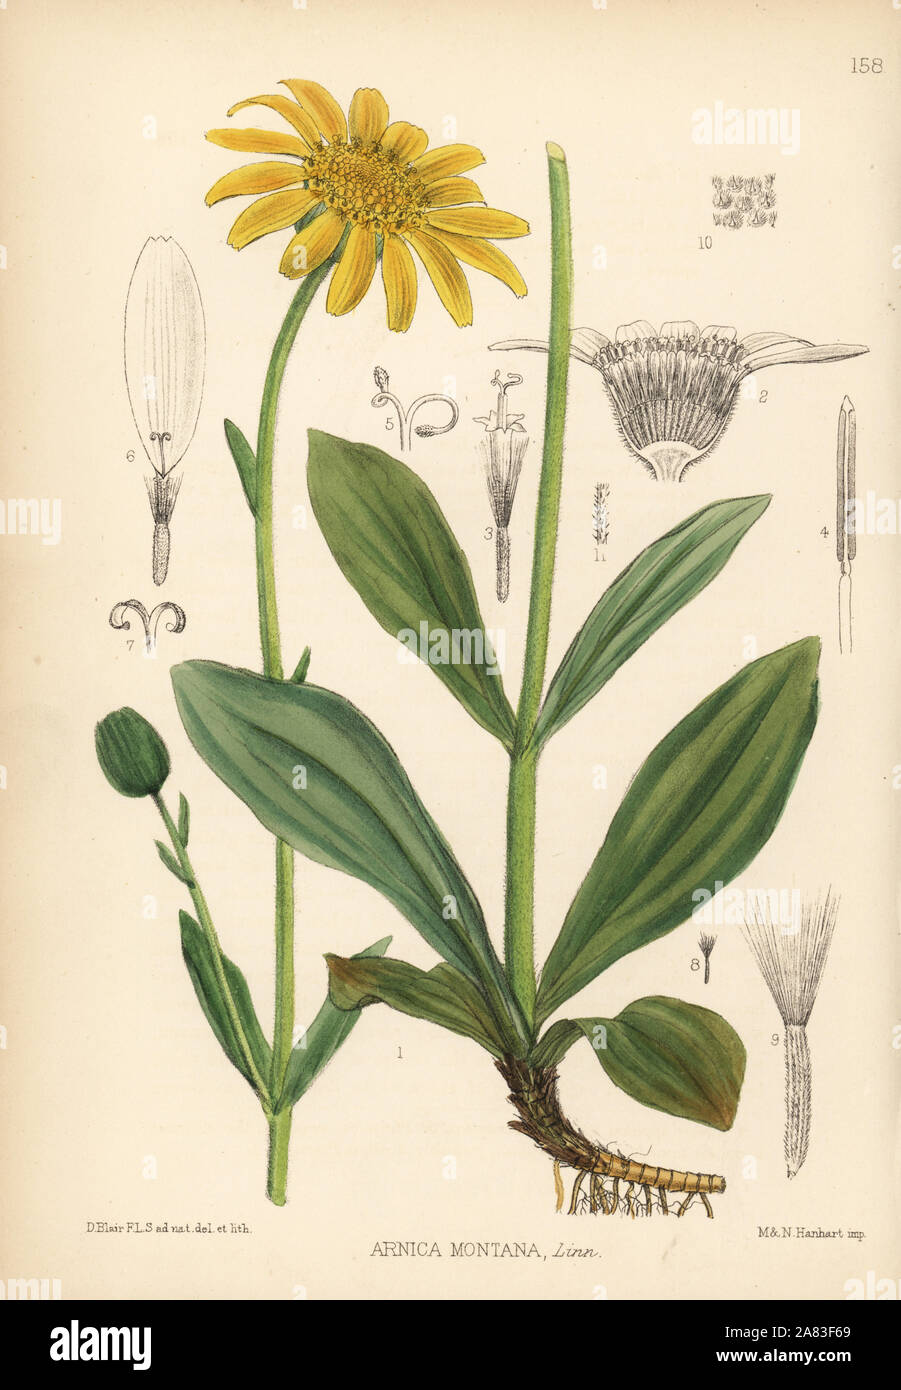 Arnica or mountain tobacco, Arnica montana. Handcoloured lithograph by Hanhart after a botanical illustration by David Blair from Robert Bentley and Henry Trimen's Medicinal Plants, London, 1880. Stock Photo